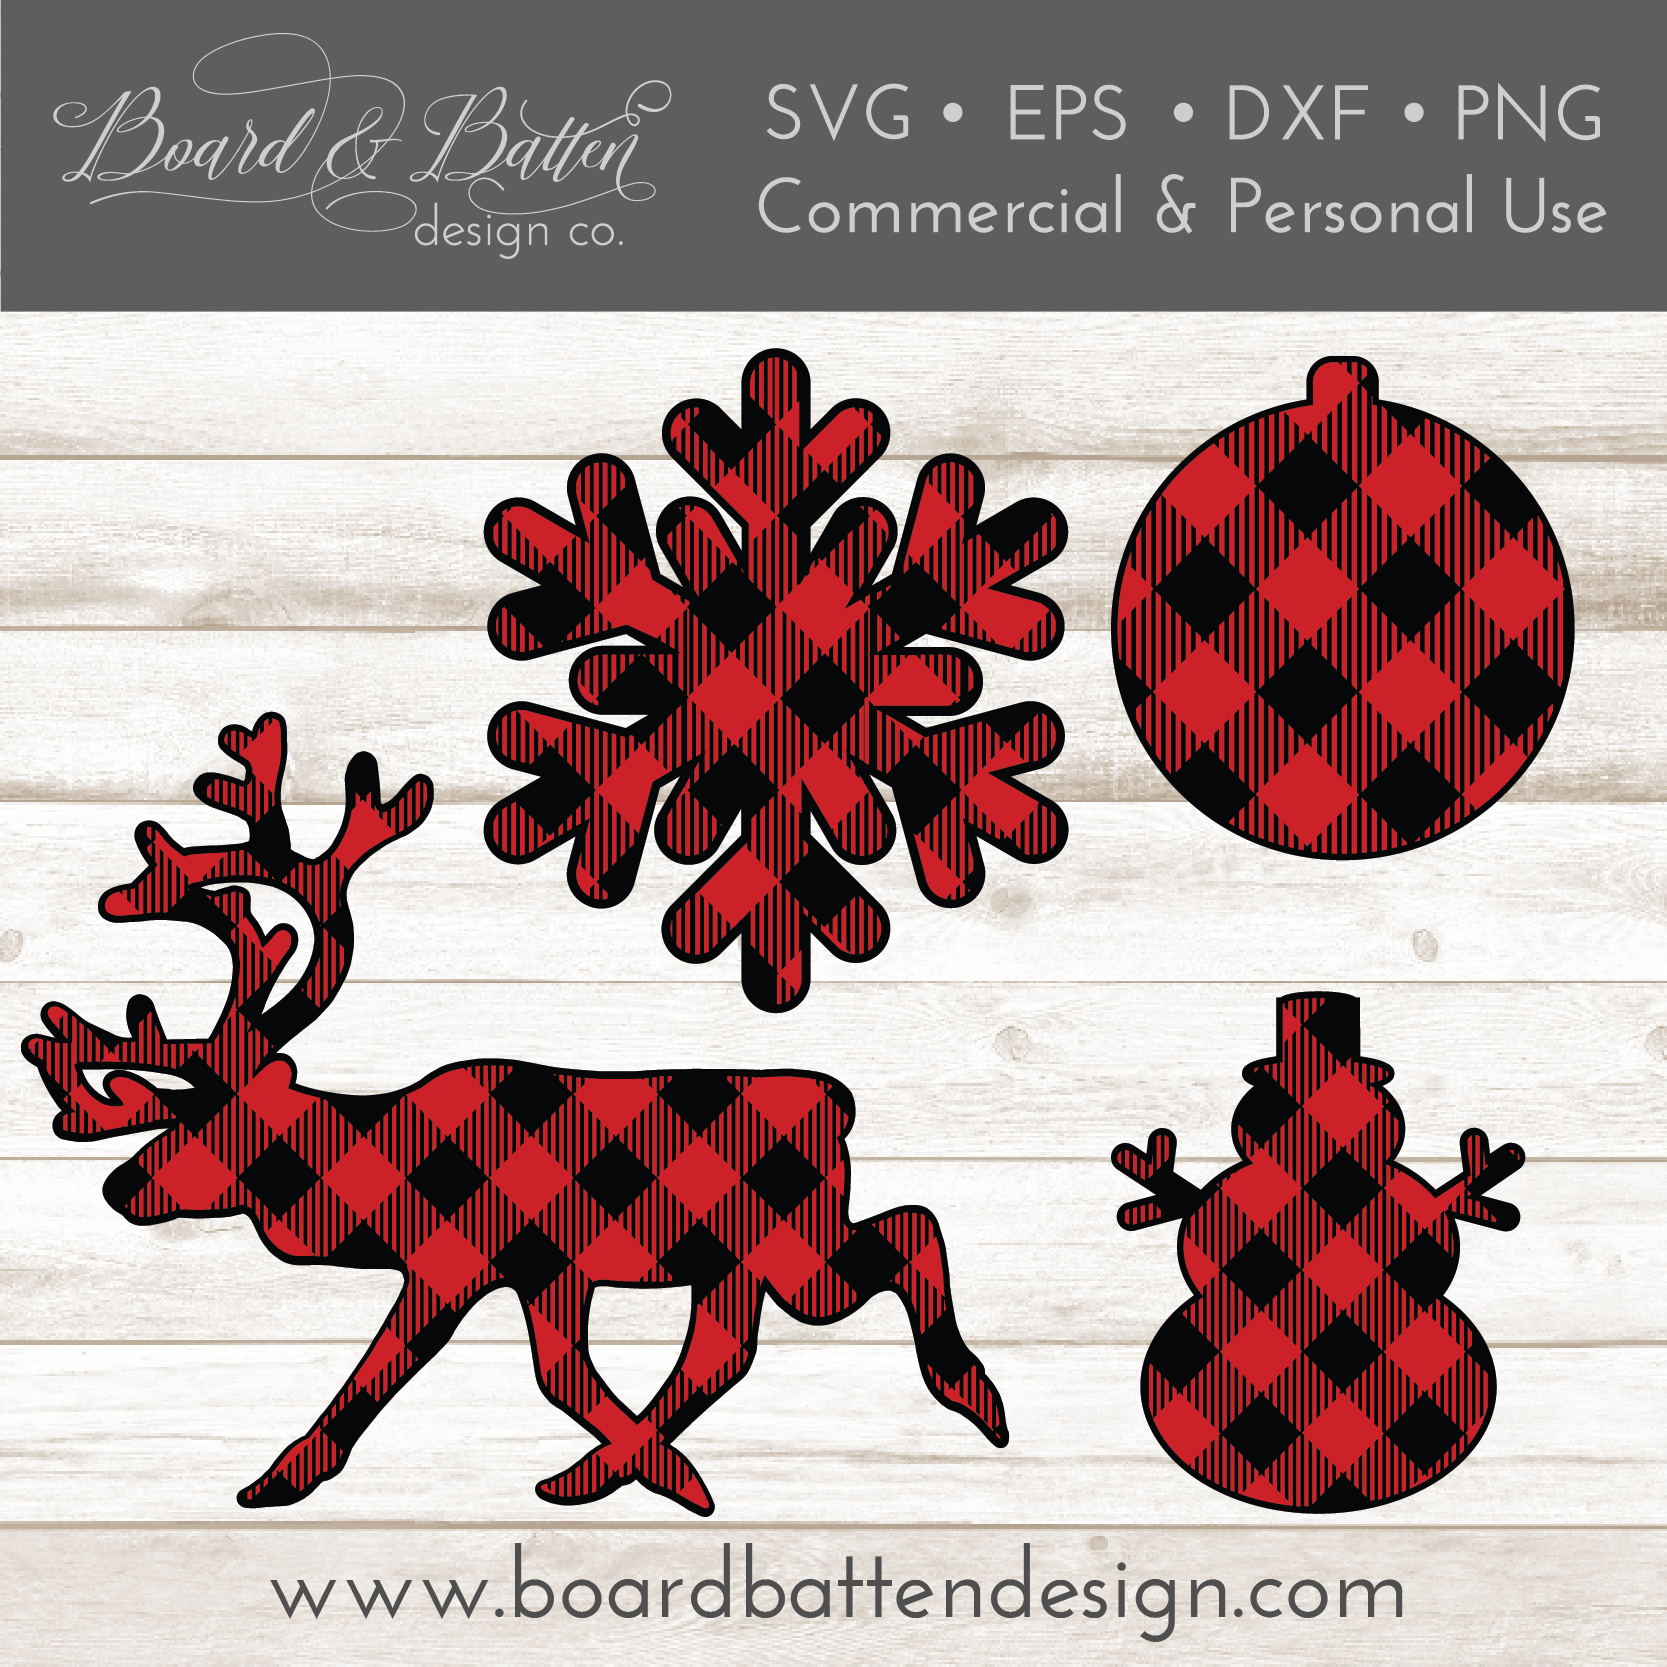 Buffalo Plaid Christmas Shapes Set 1 - Reindeer, Snowflake, Snowman, and Ornament SVG File - Commercial Use SVG Files for Cricut & Silhouette